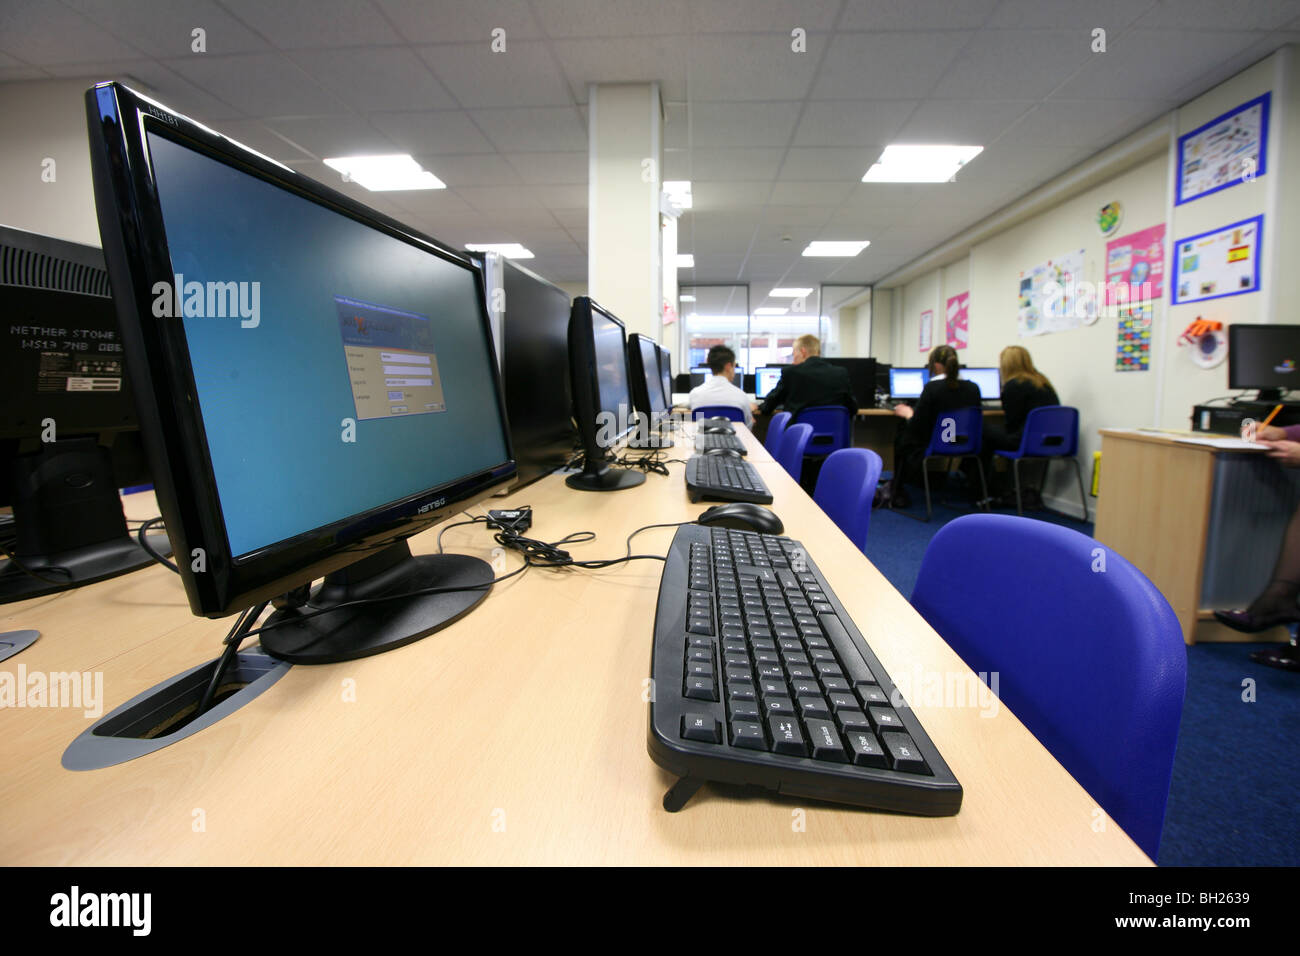 Row of computer monitors and keyboards with children in the background Stock Photo